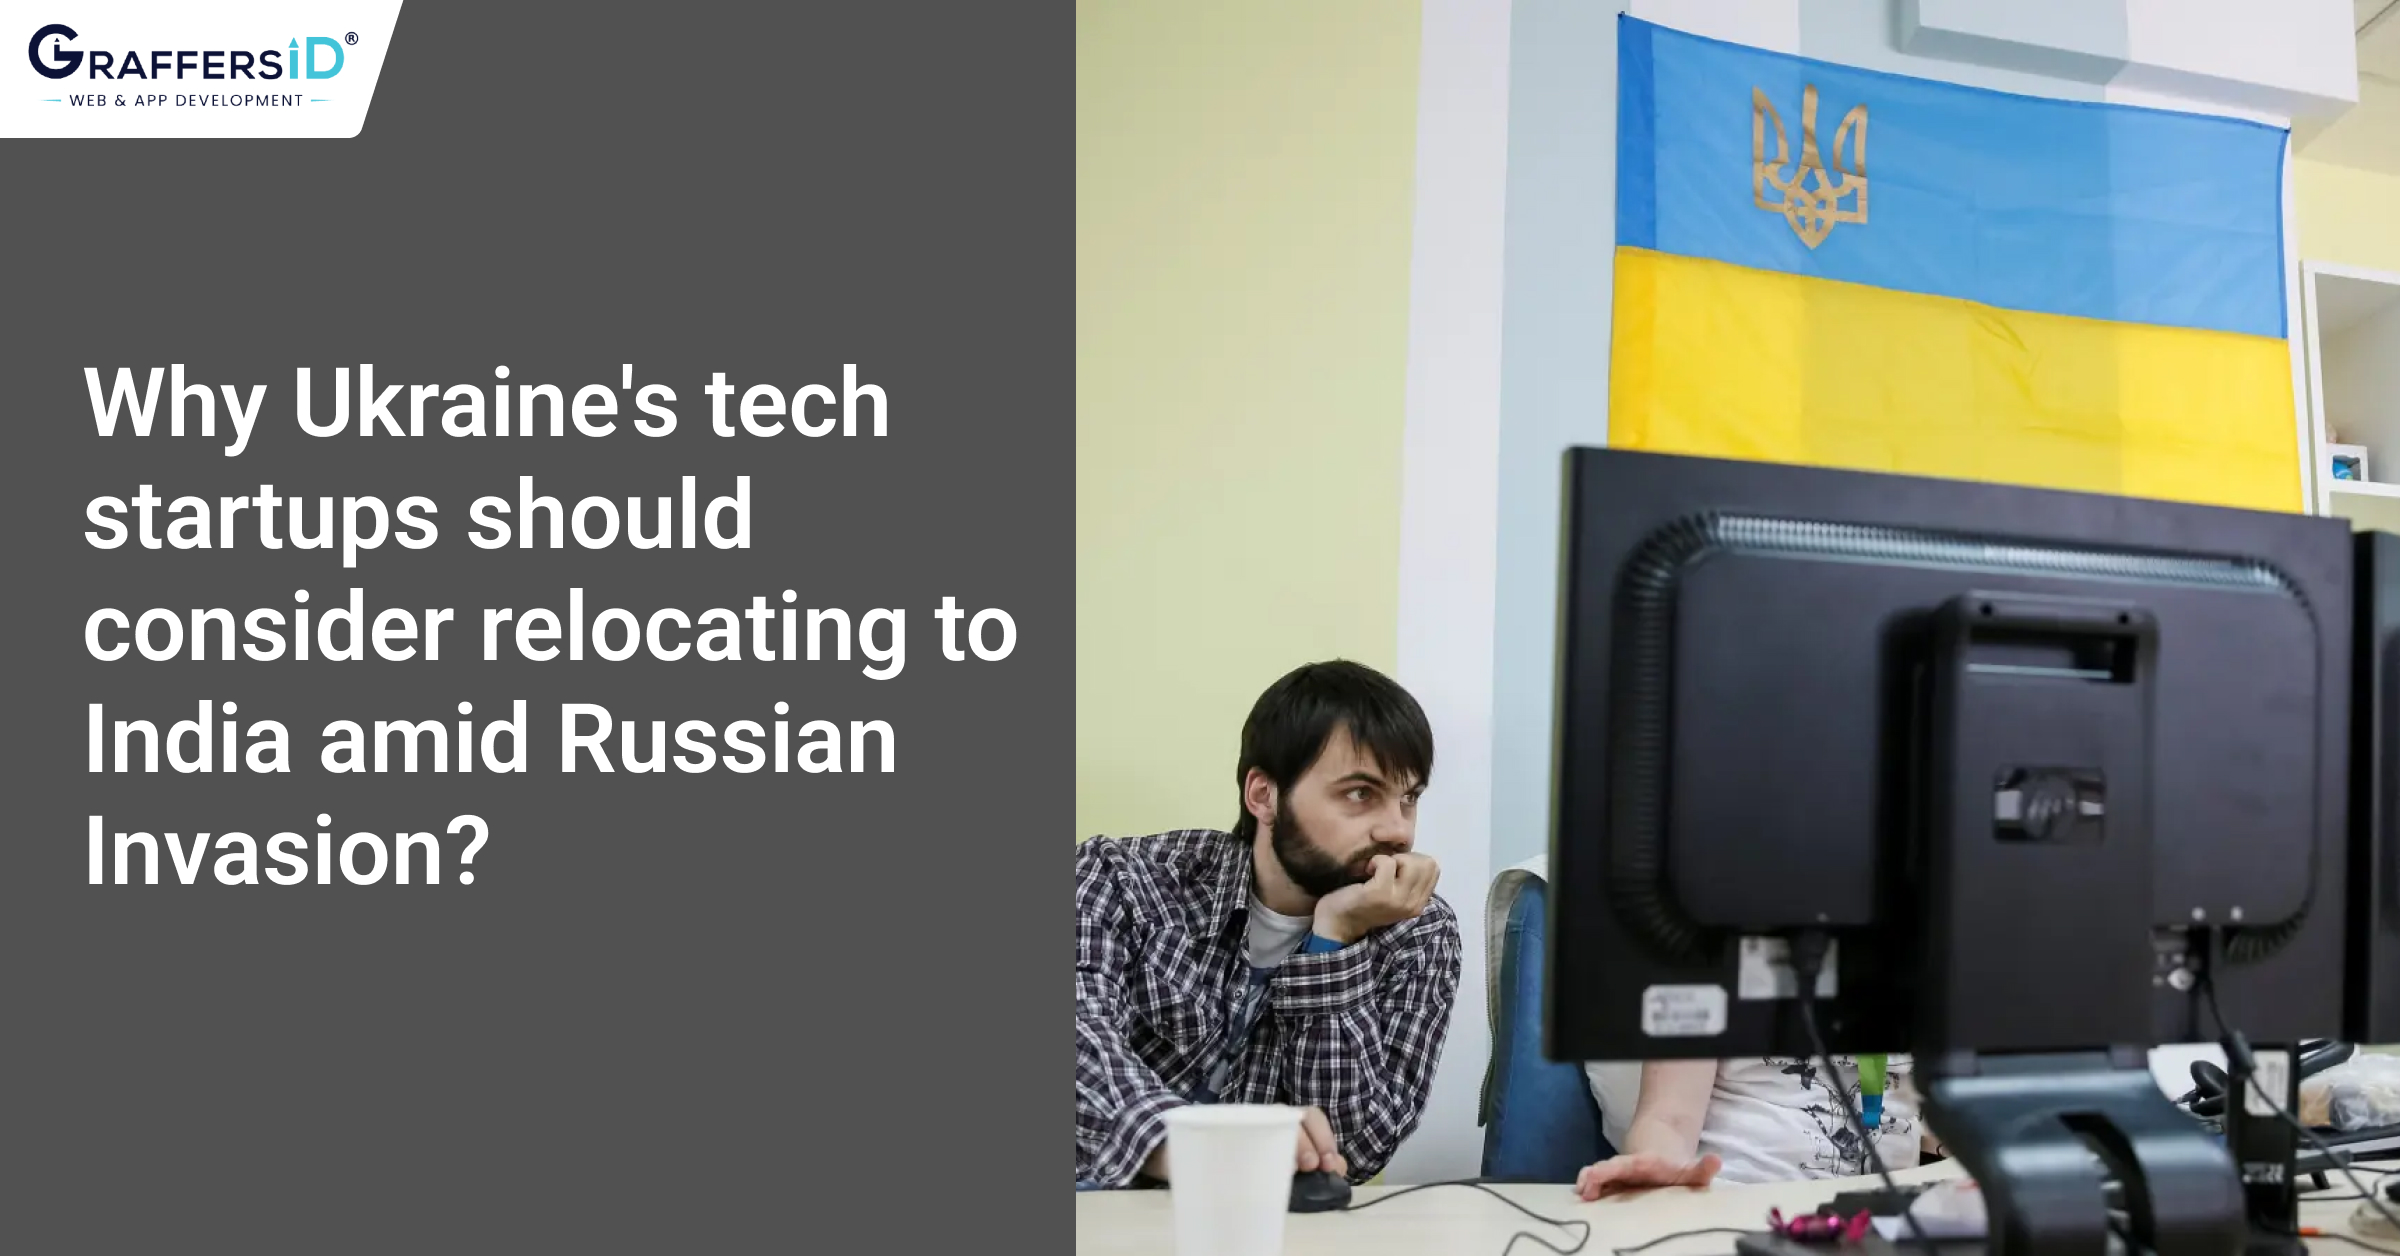 Why Ukraine's tech startups should consider relocating to India amid Russian Invasion